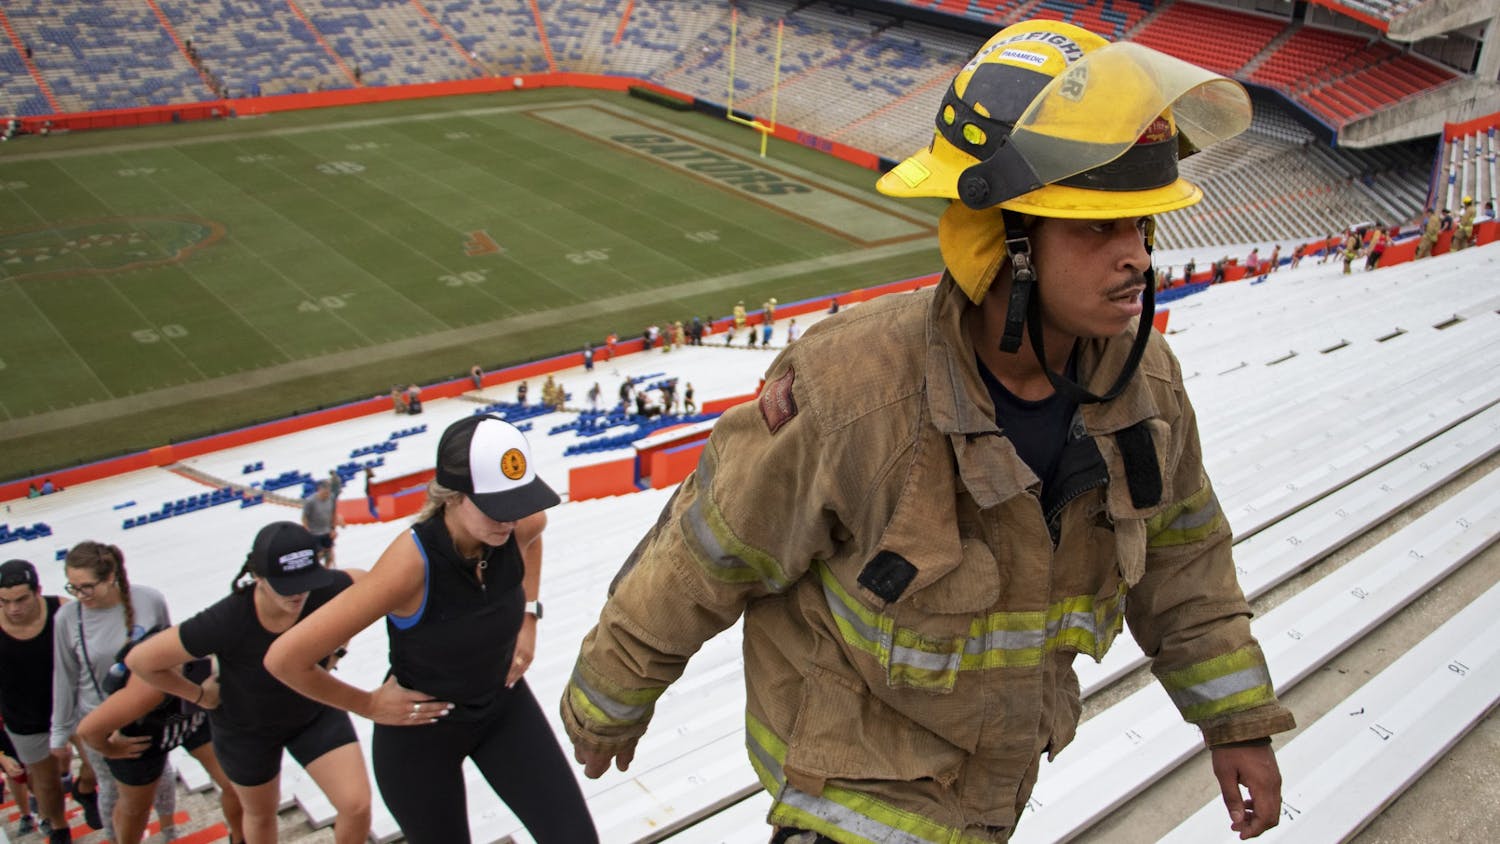 Anthony “Hutch” Hutchinson, Gainesville Fire Rescue first responder, marches up the stadium steps during the 5th Annual UF Collegiate Veterans Society 9/11 Memorial Stair Climb at Ben Hill Griffin Stadium on Saturday, Sept. 11, 2021.